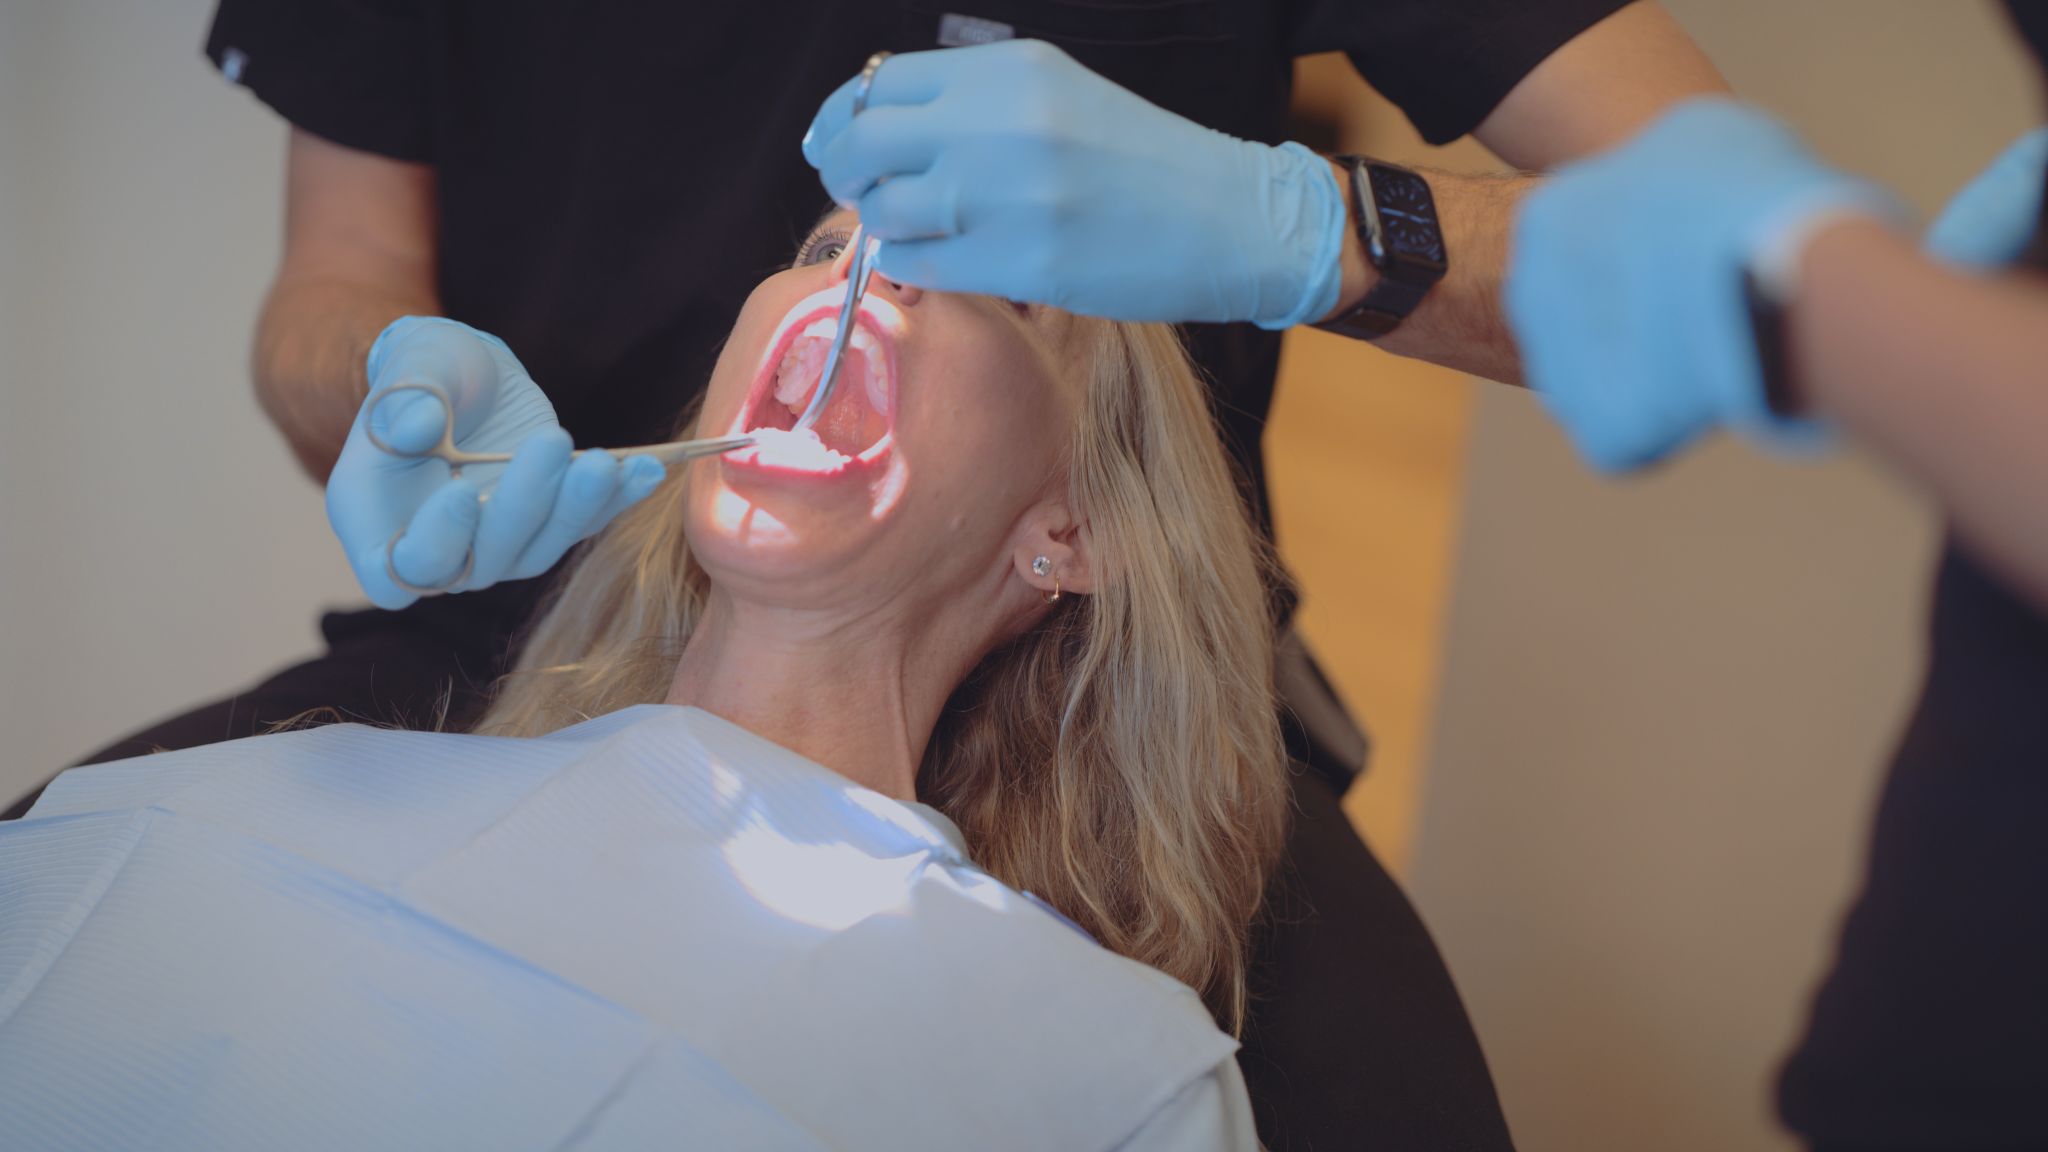 Overhead view of male dentist working on a female patient